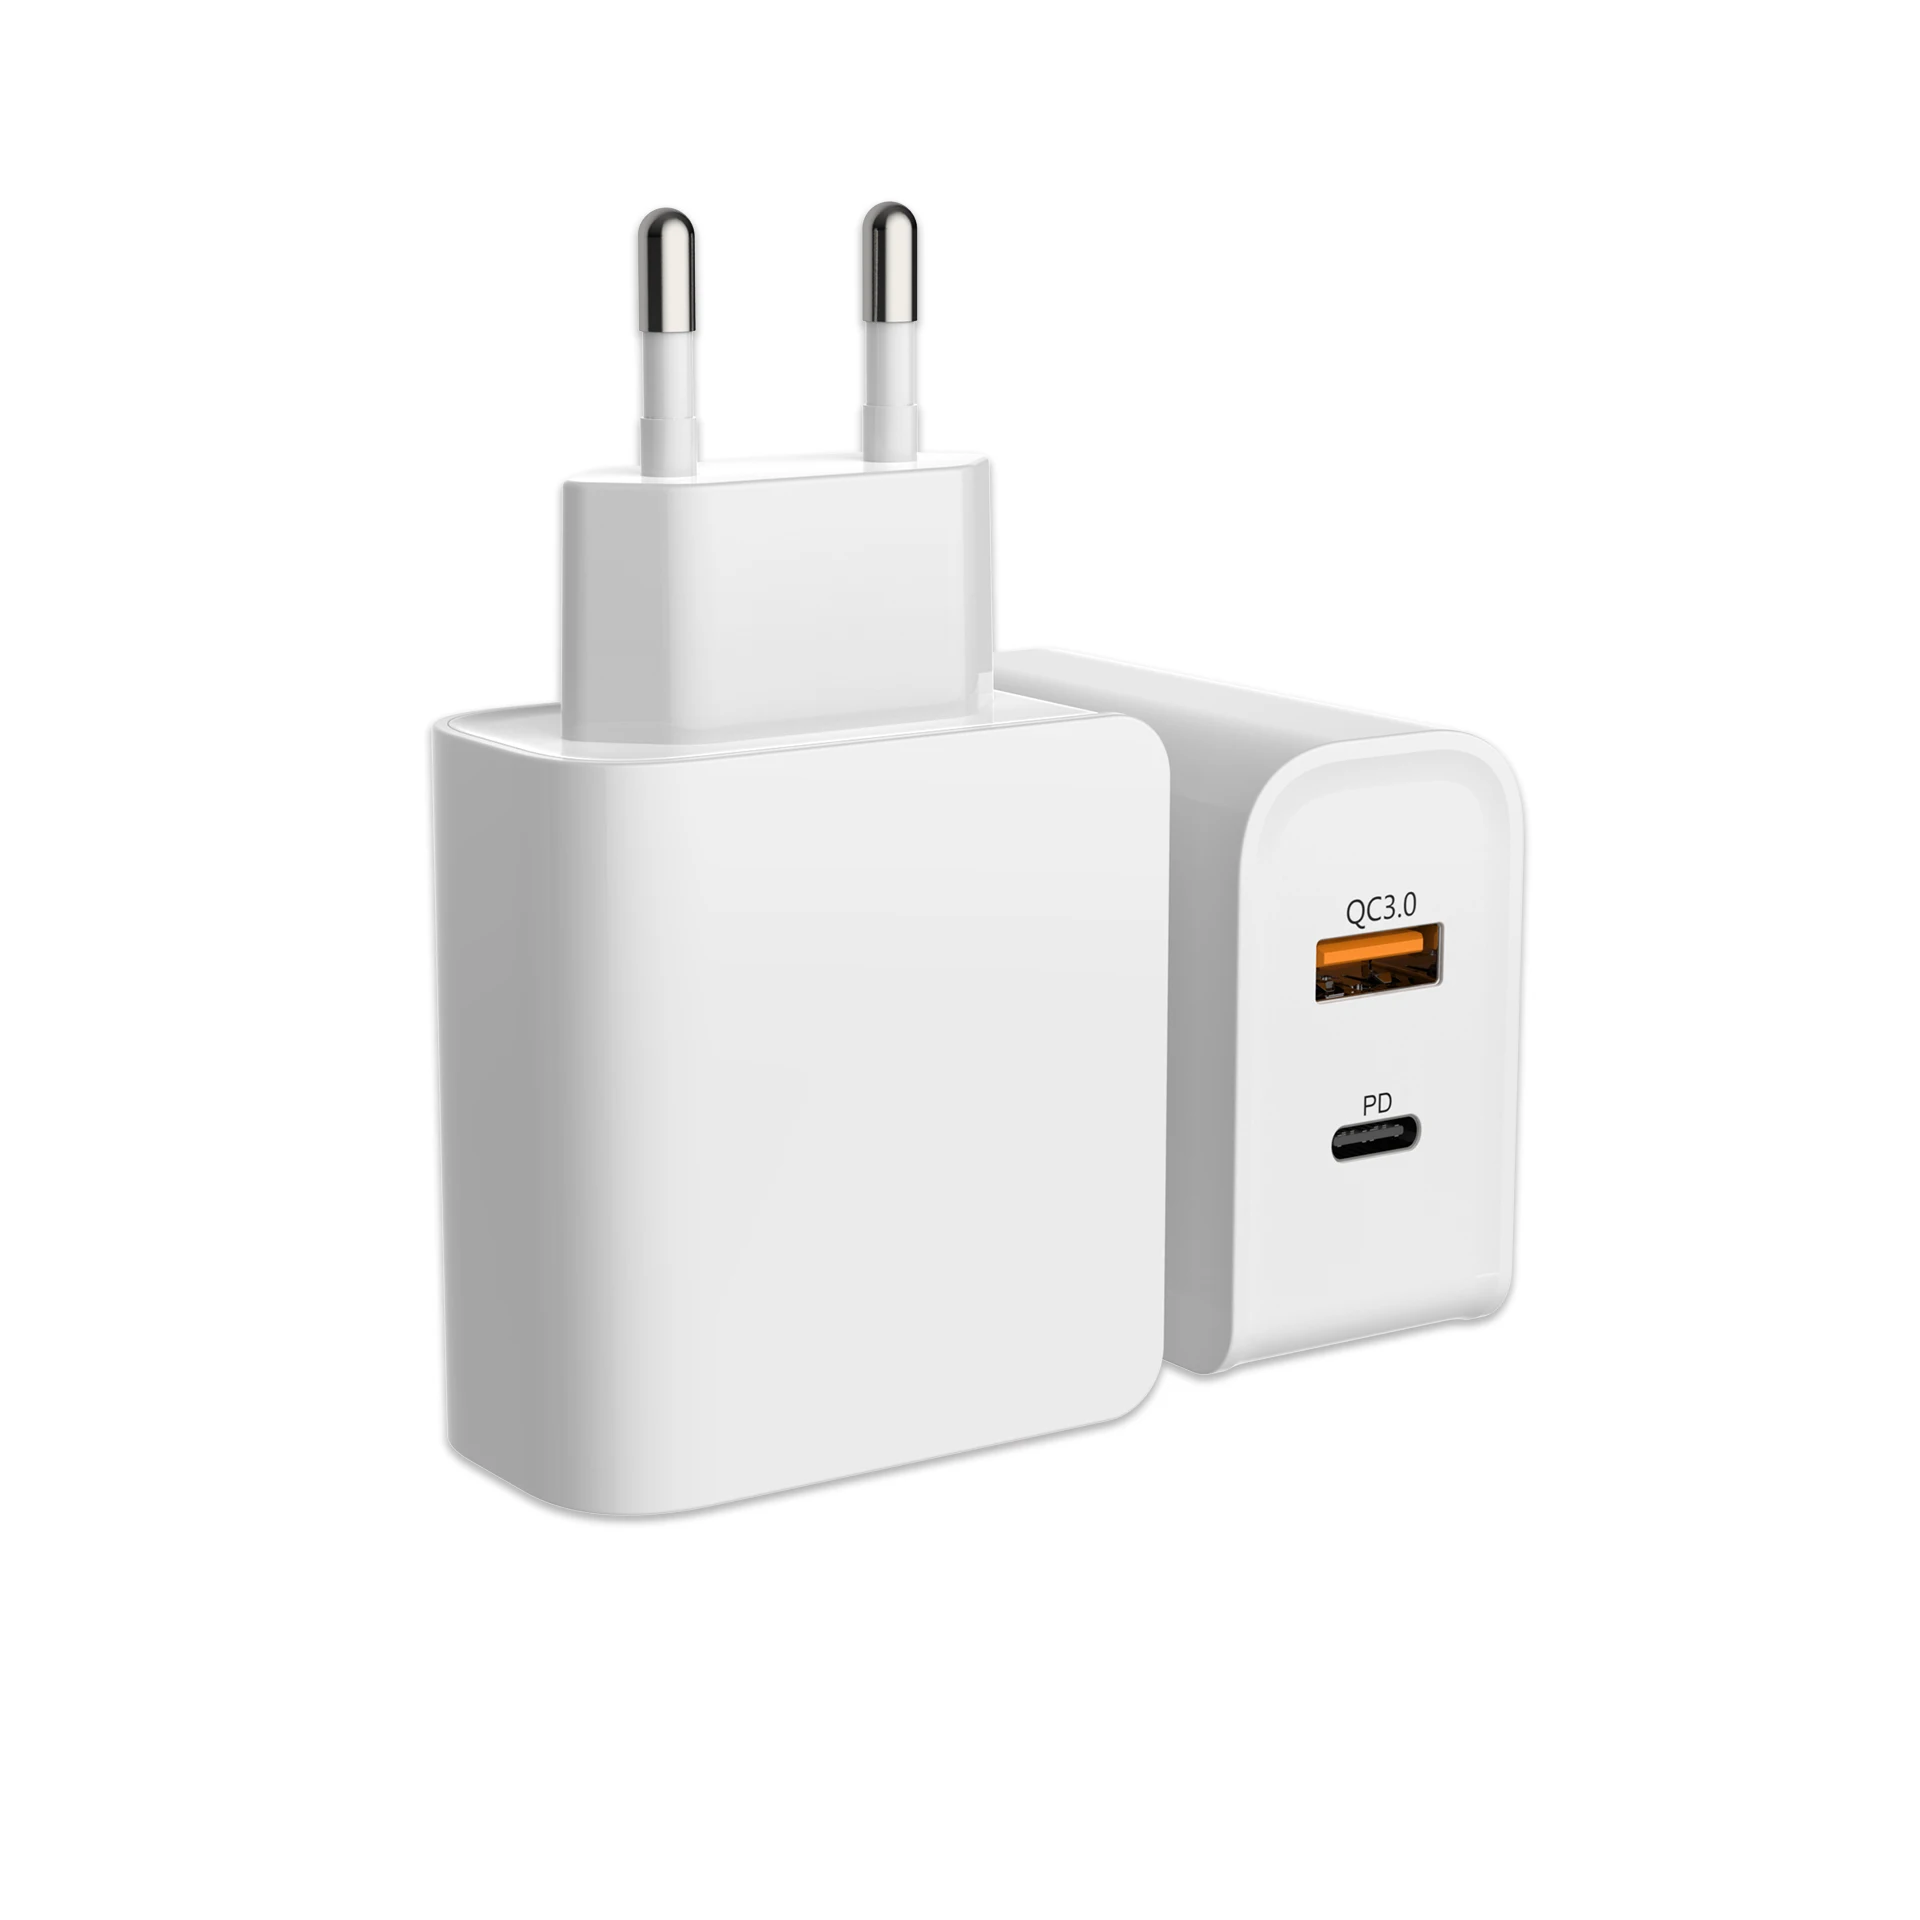 QC3.0 Type-c PD 18w wall charger quick phone chargerQC3.0 Type-c PD 18w wall charger quick phone chargerQC3.0 Type-c PD 18w wall charger quick phone chargerQC3.0 Type-c PD 18w wall charger quick phone chargerQC3.0 Type-c PD 18w wall charger quick phone chargerPD Wall ChargerPD Wall ChargerQC3.0 Type-c  PD 18w wall  charger   quick phone  charger